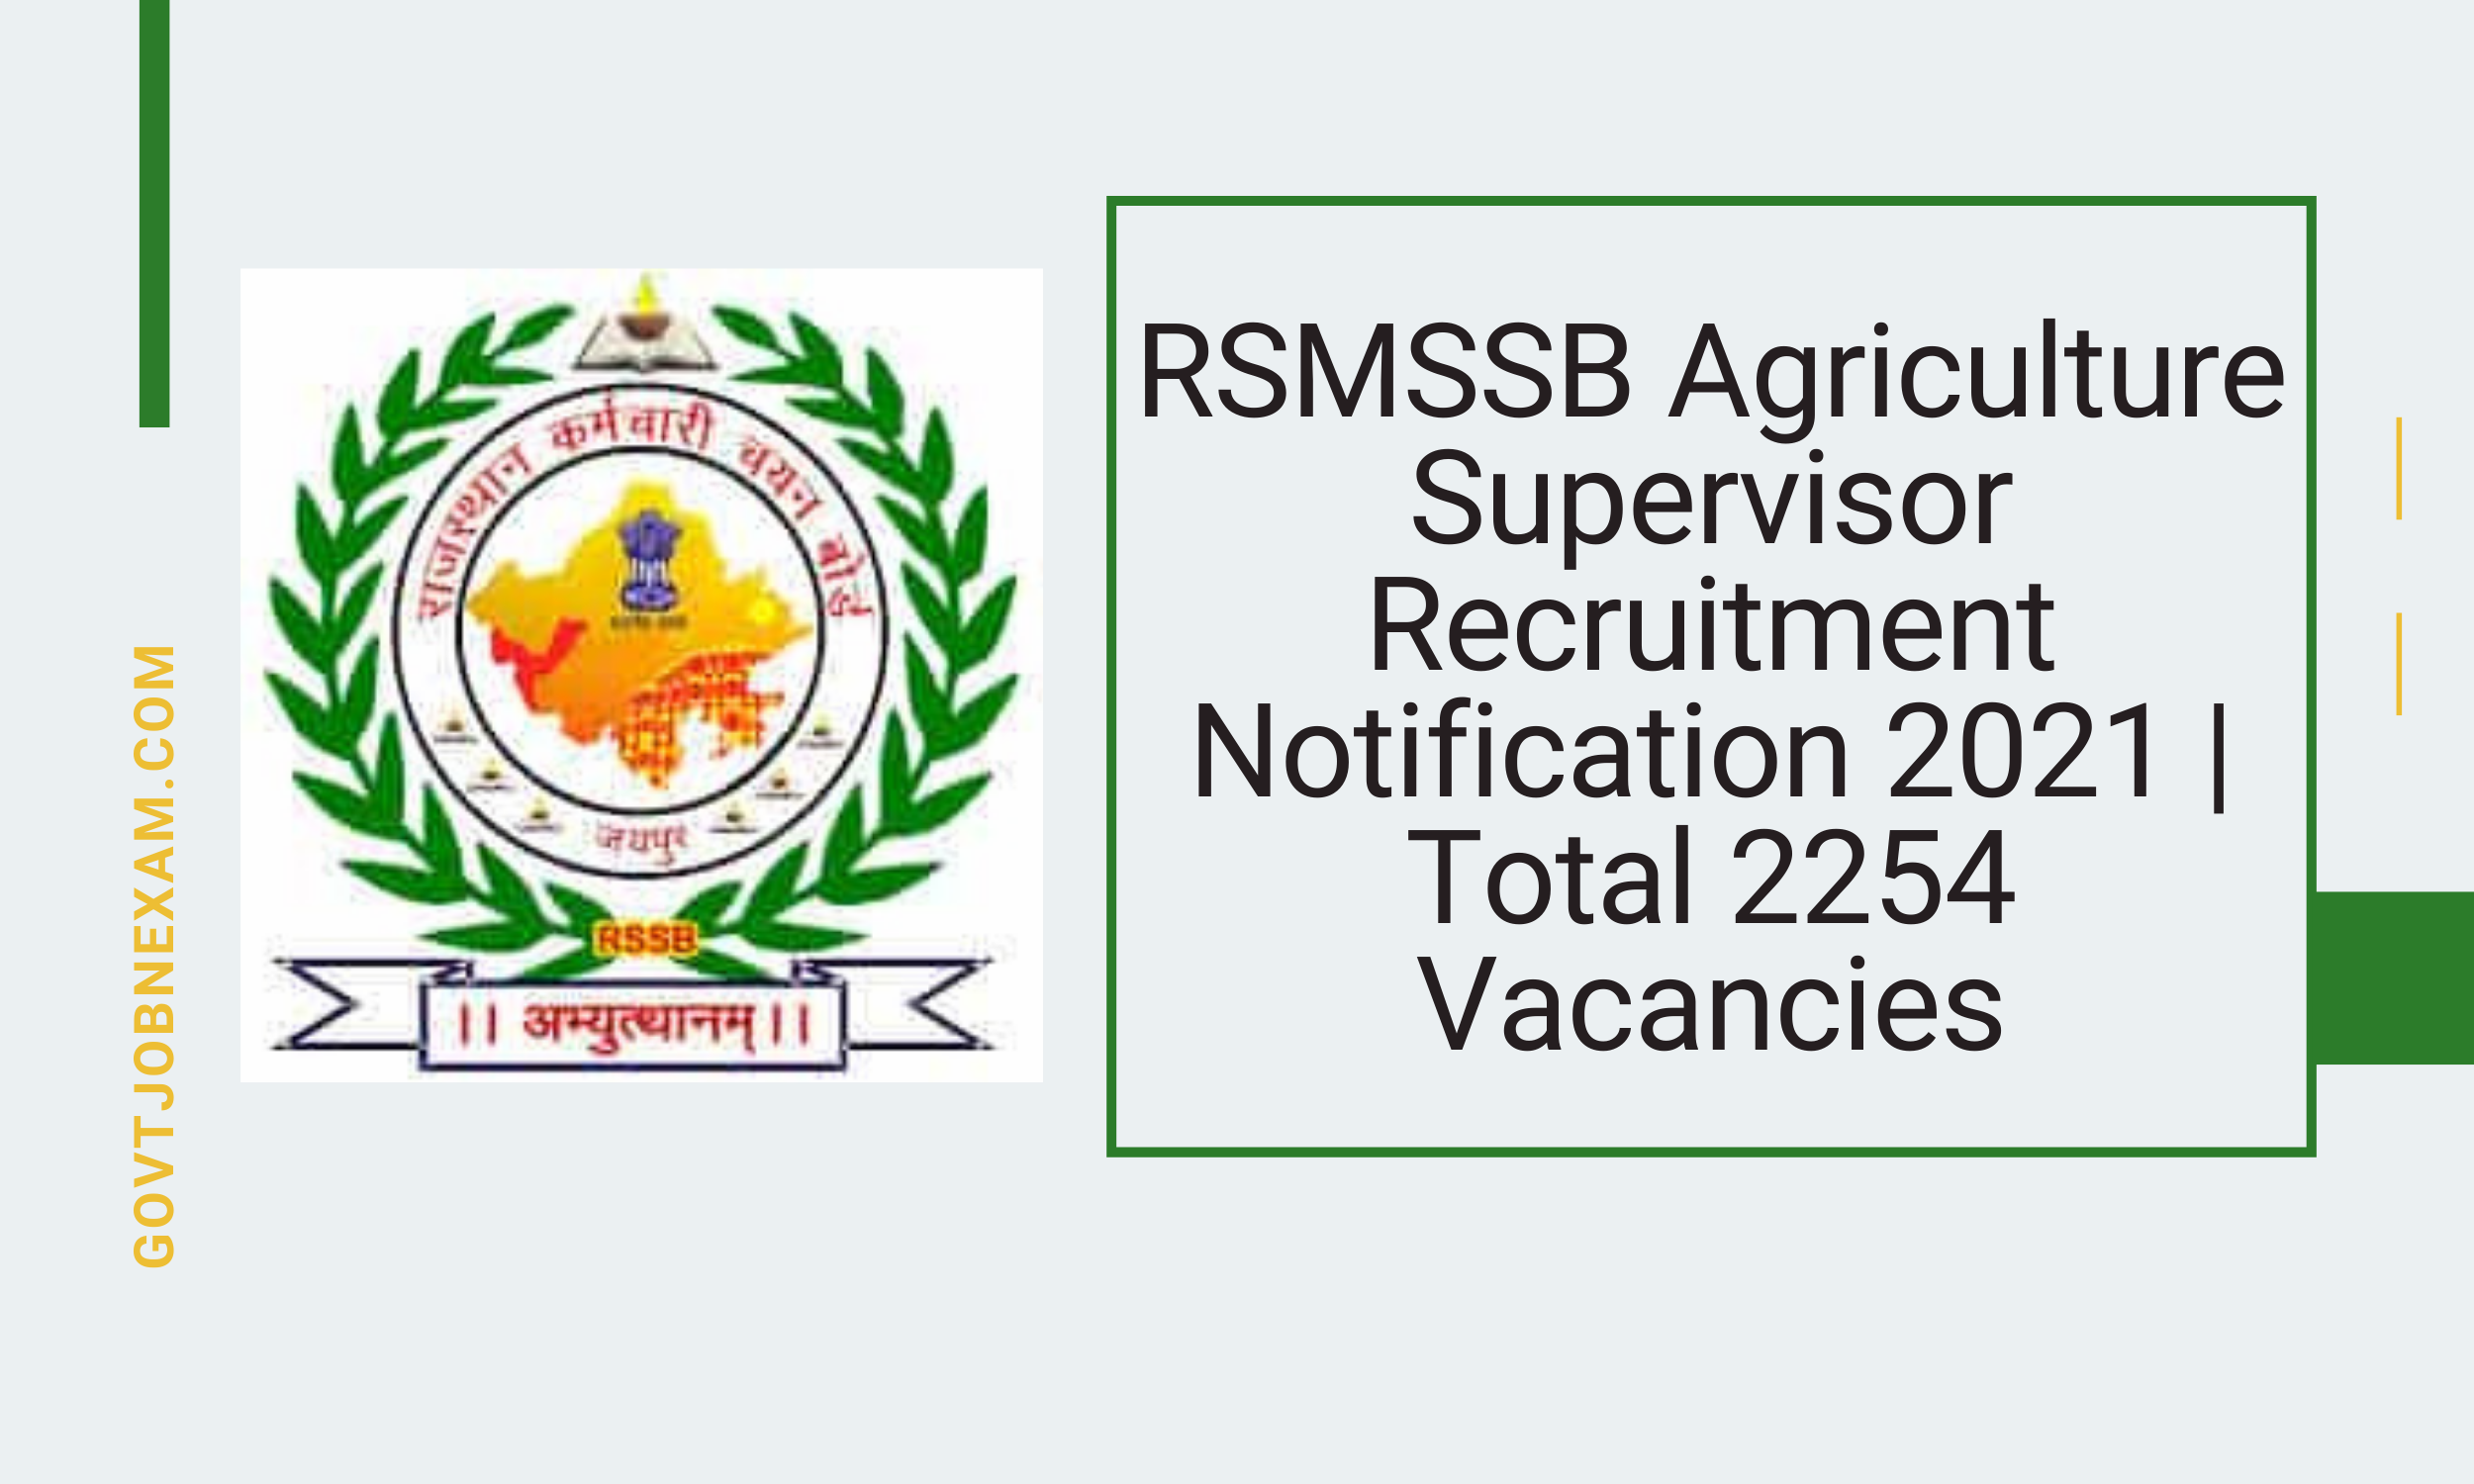 You are currently viewing RSMSSB Agriculture Supervisor Recruitment Notification 2021 | Total 2254 Vacancies